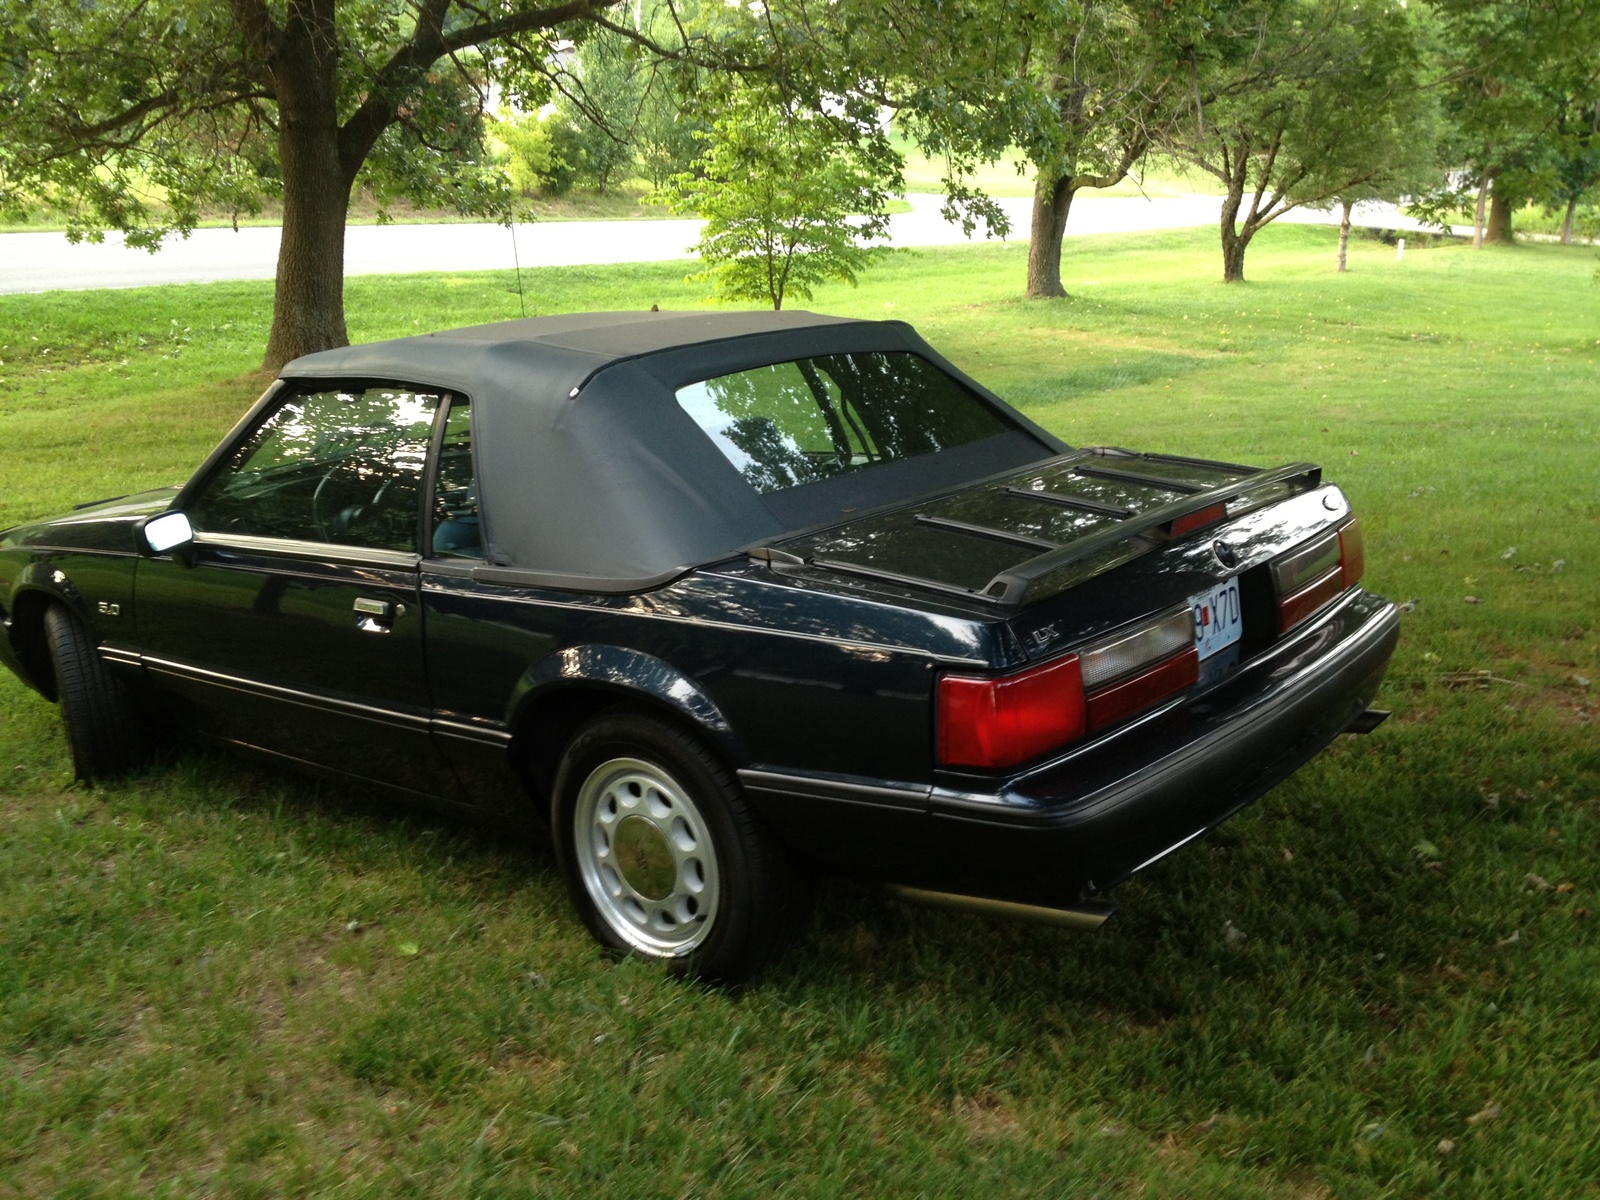 Much horsepower does 1988 ford mustang gt have #6